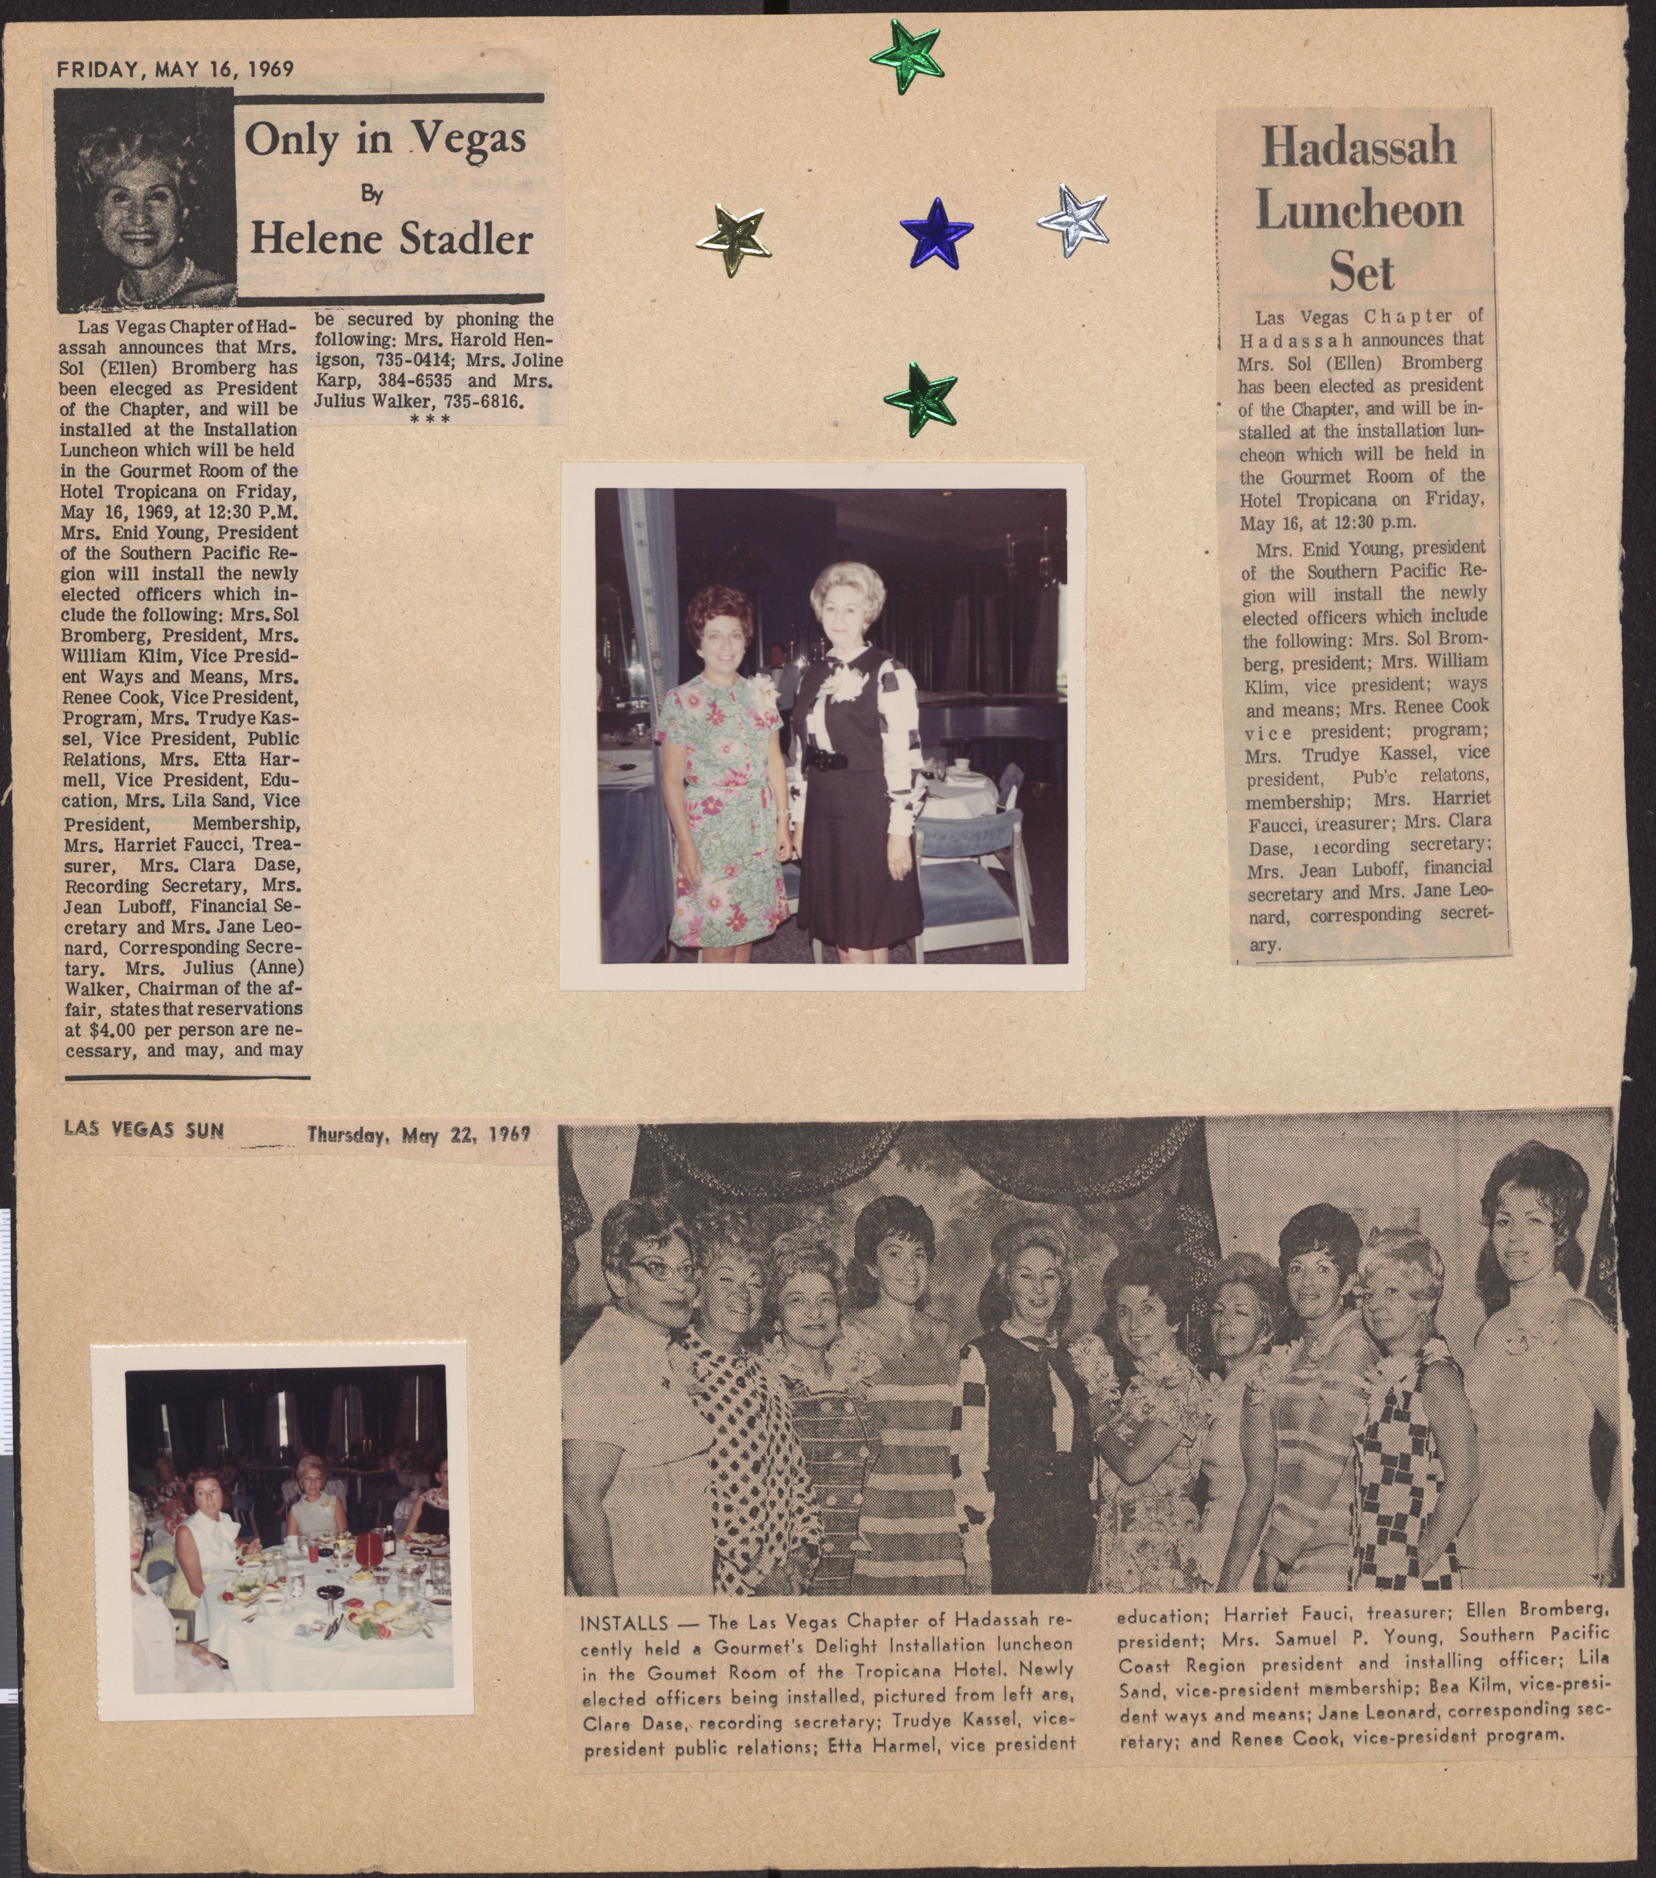 Newspaper clippings about Hadassah luncheon and officer installation events and photographs, May 1969